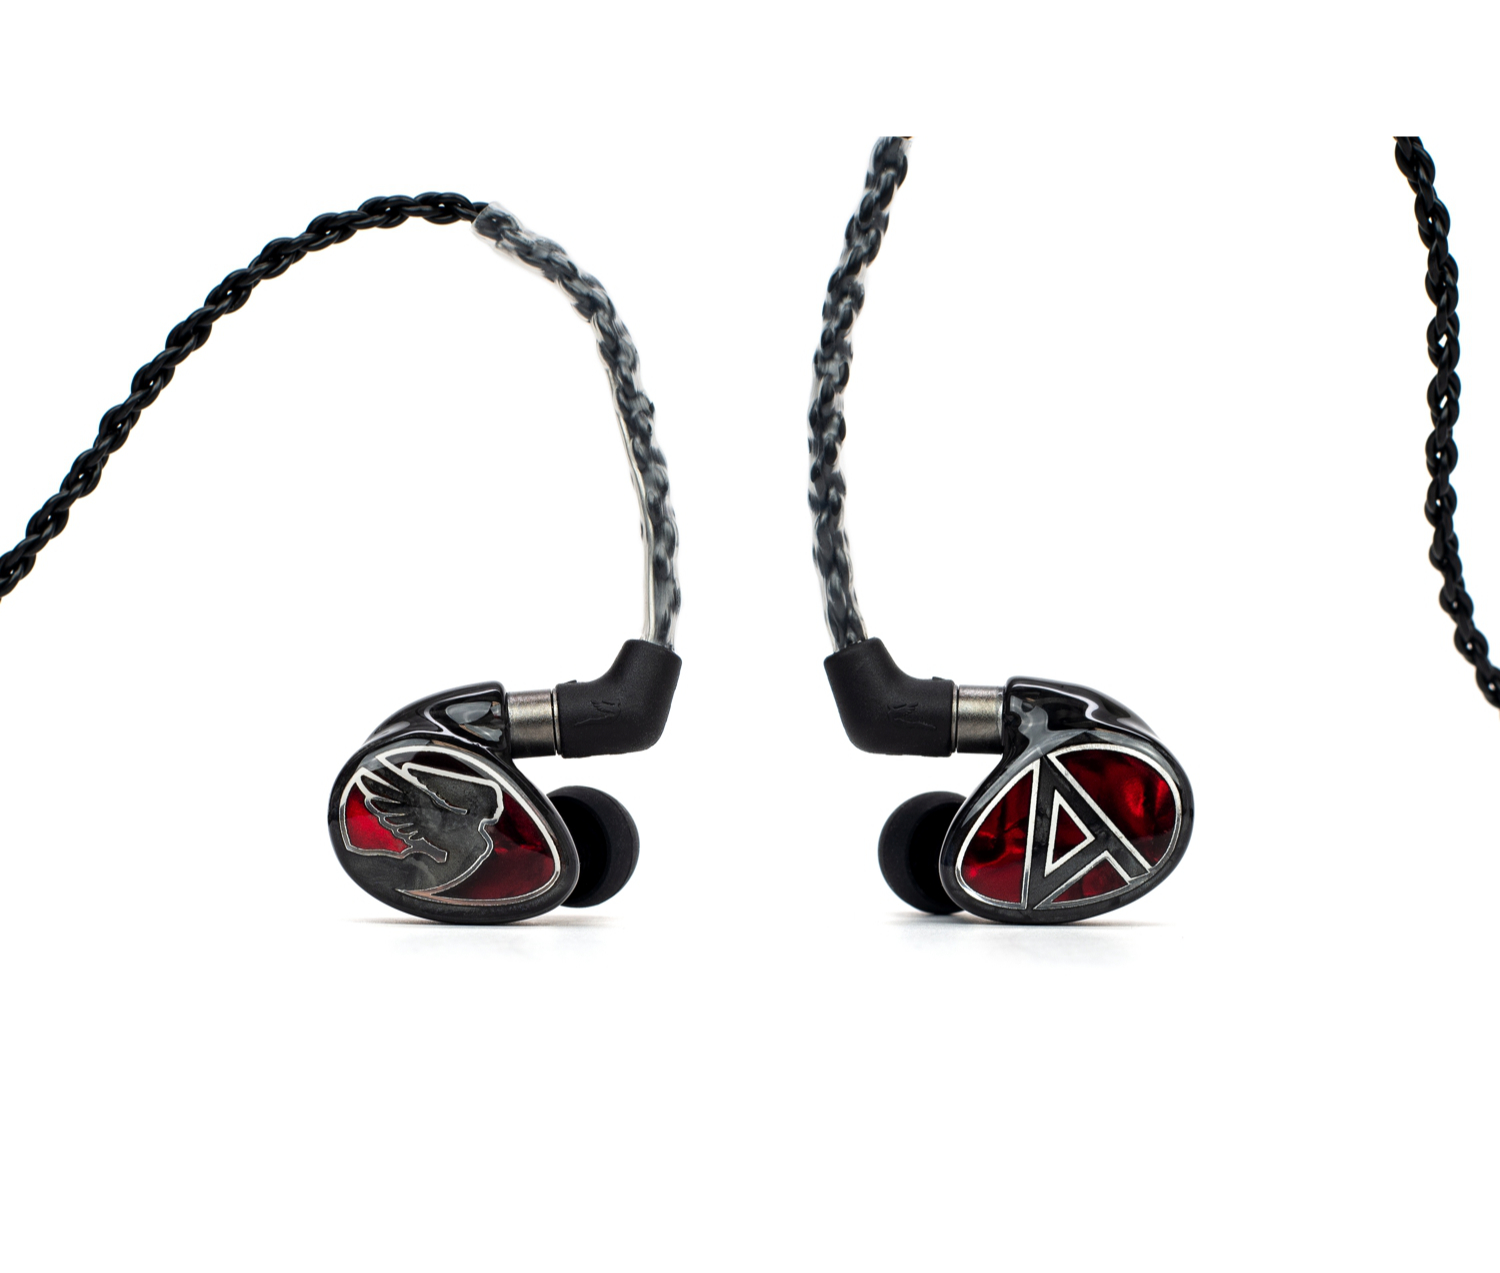 Astell & Kern JH Audio Layla Aion In-Ear (Limited Edition